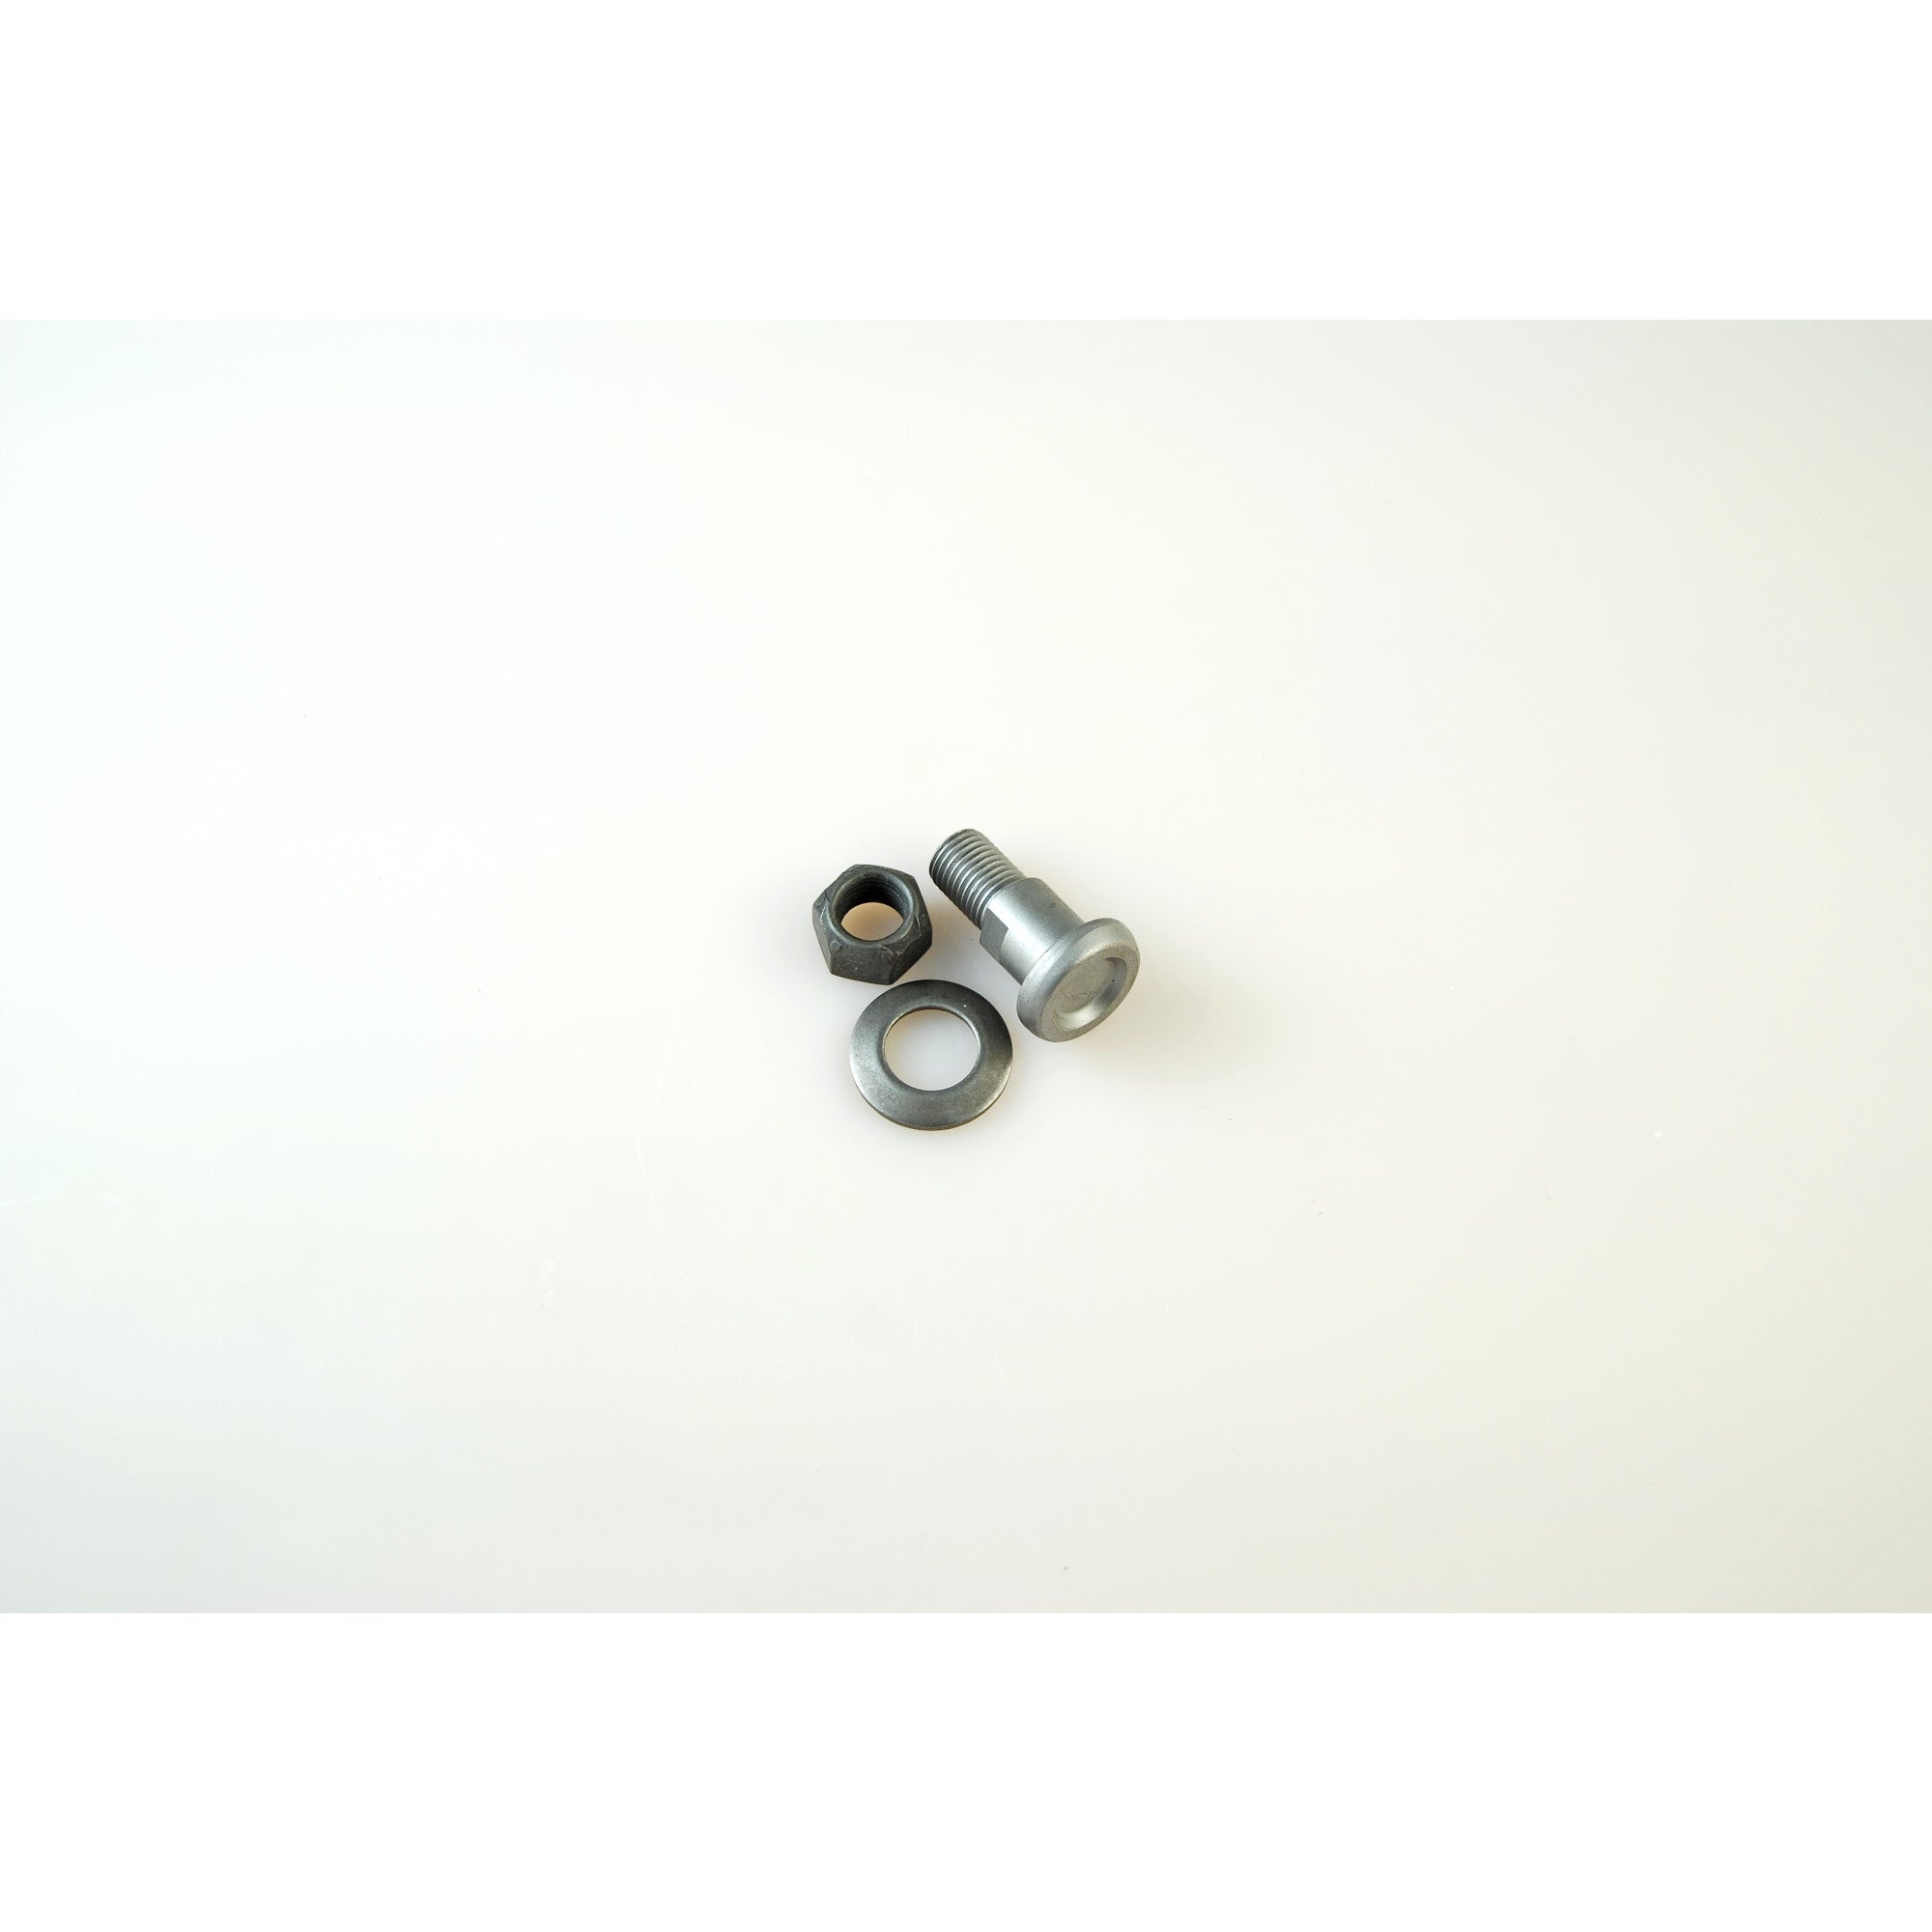 Replacement Pivot Bolt, Nut and Washer for Hedge Shears